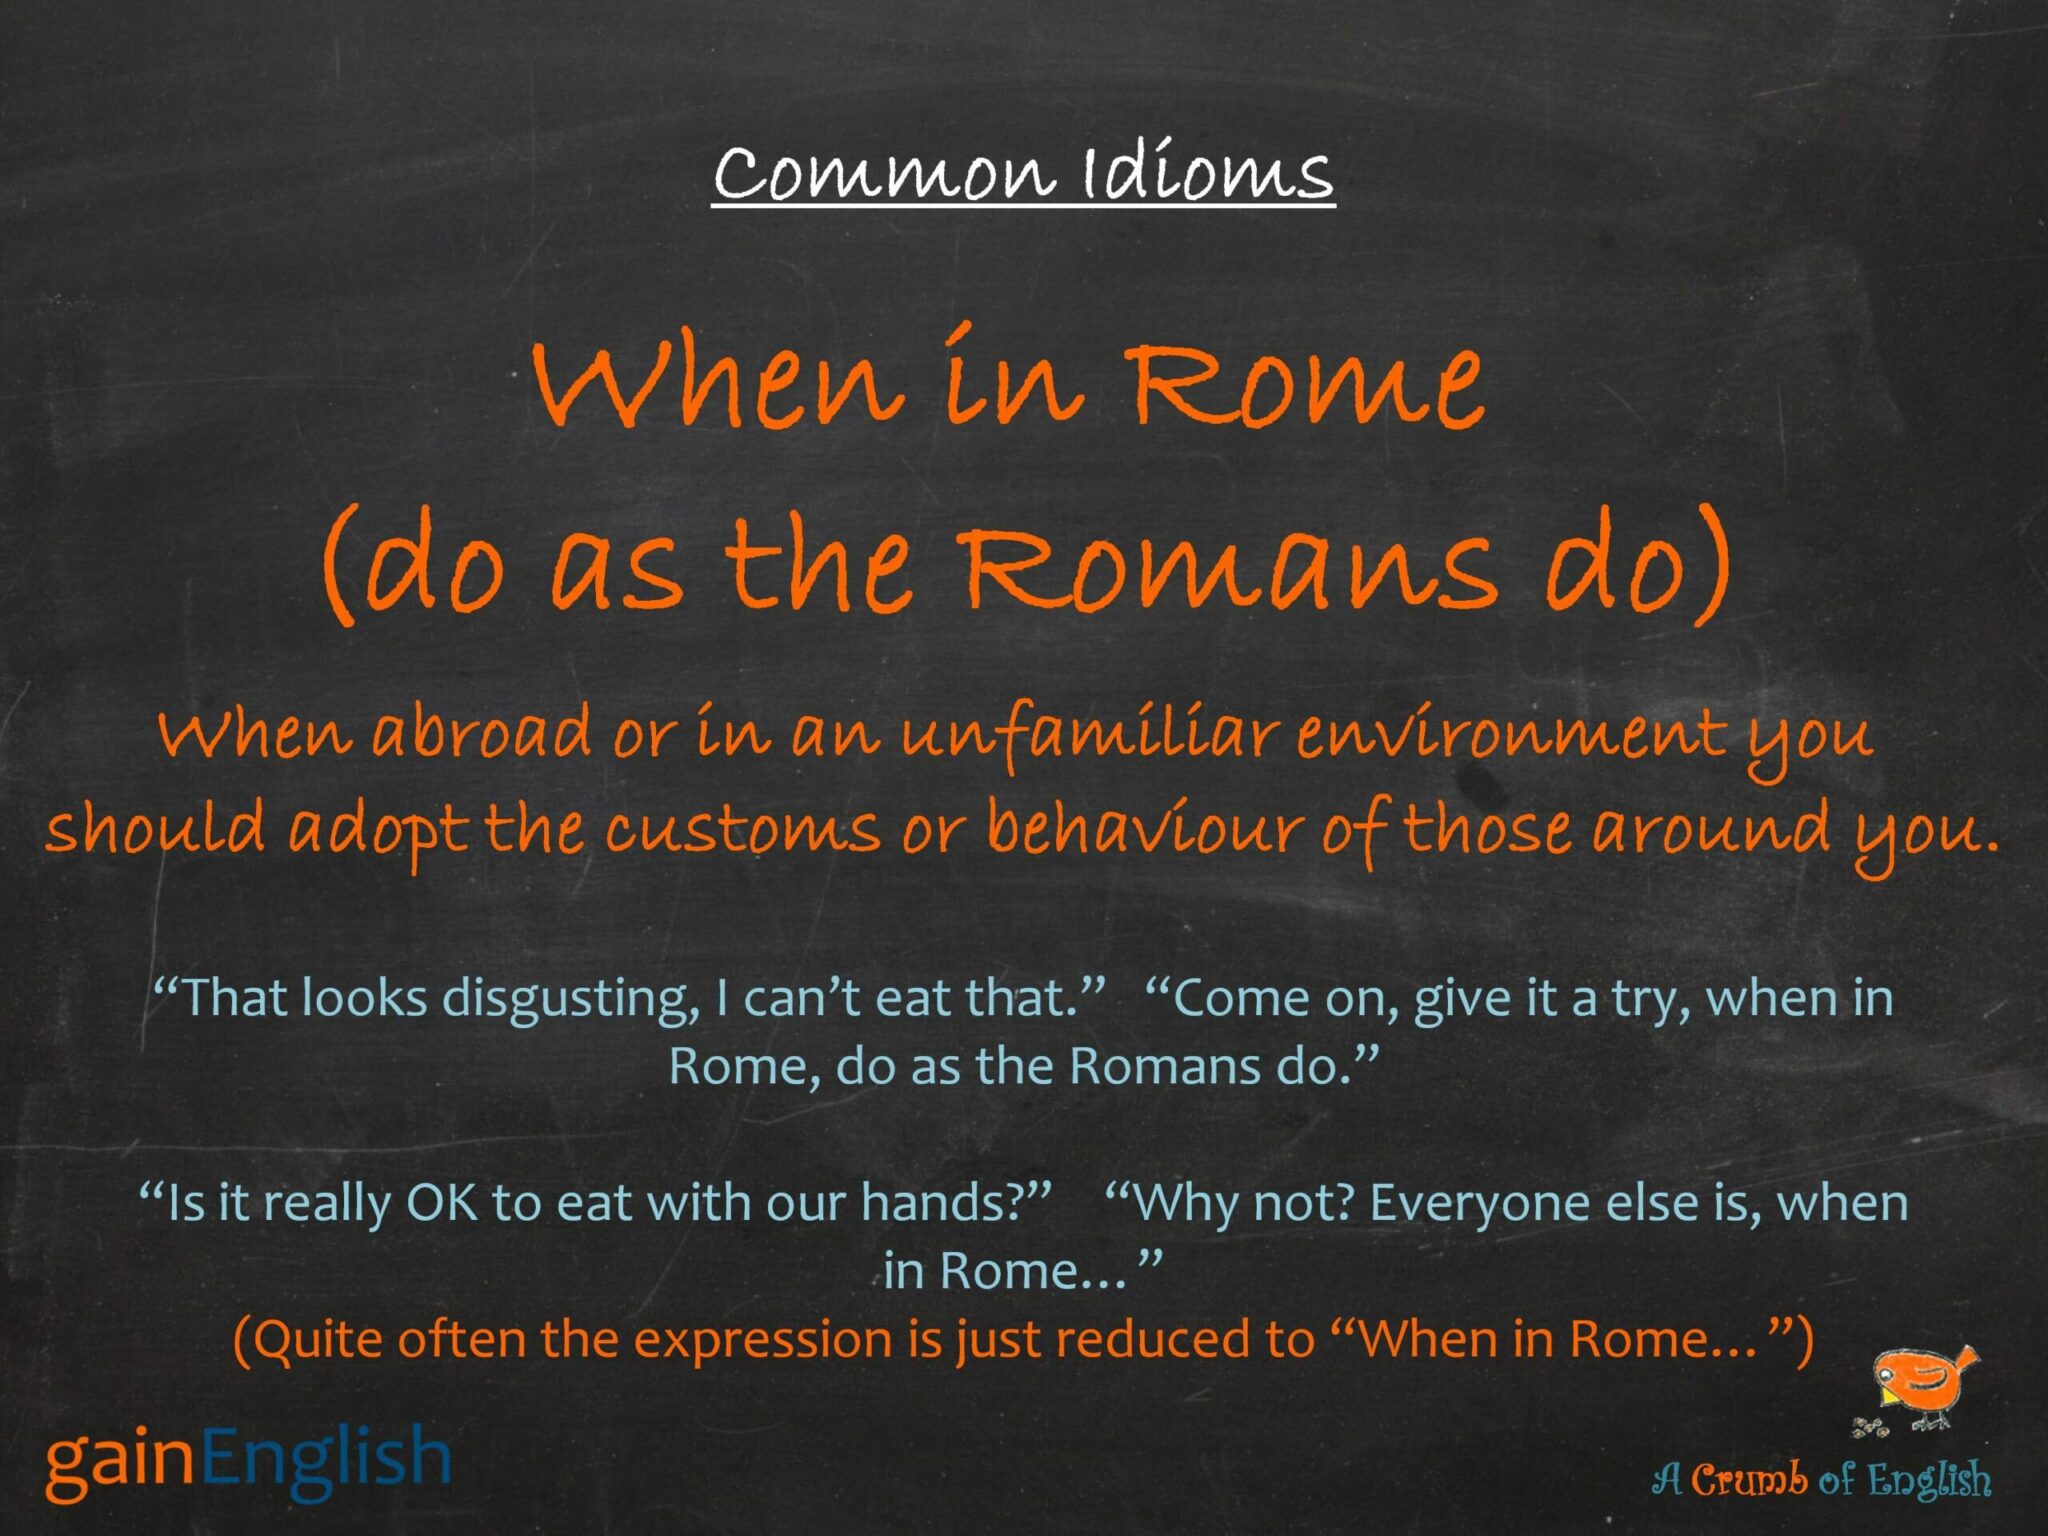 what does the expression when in rome do as the romans do mean and where did it come from scaled